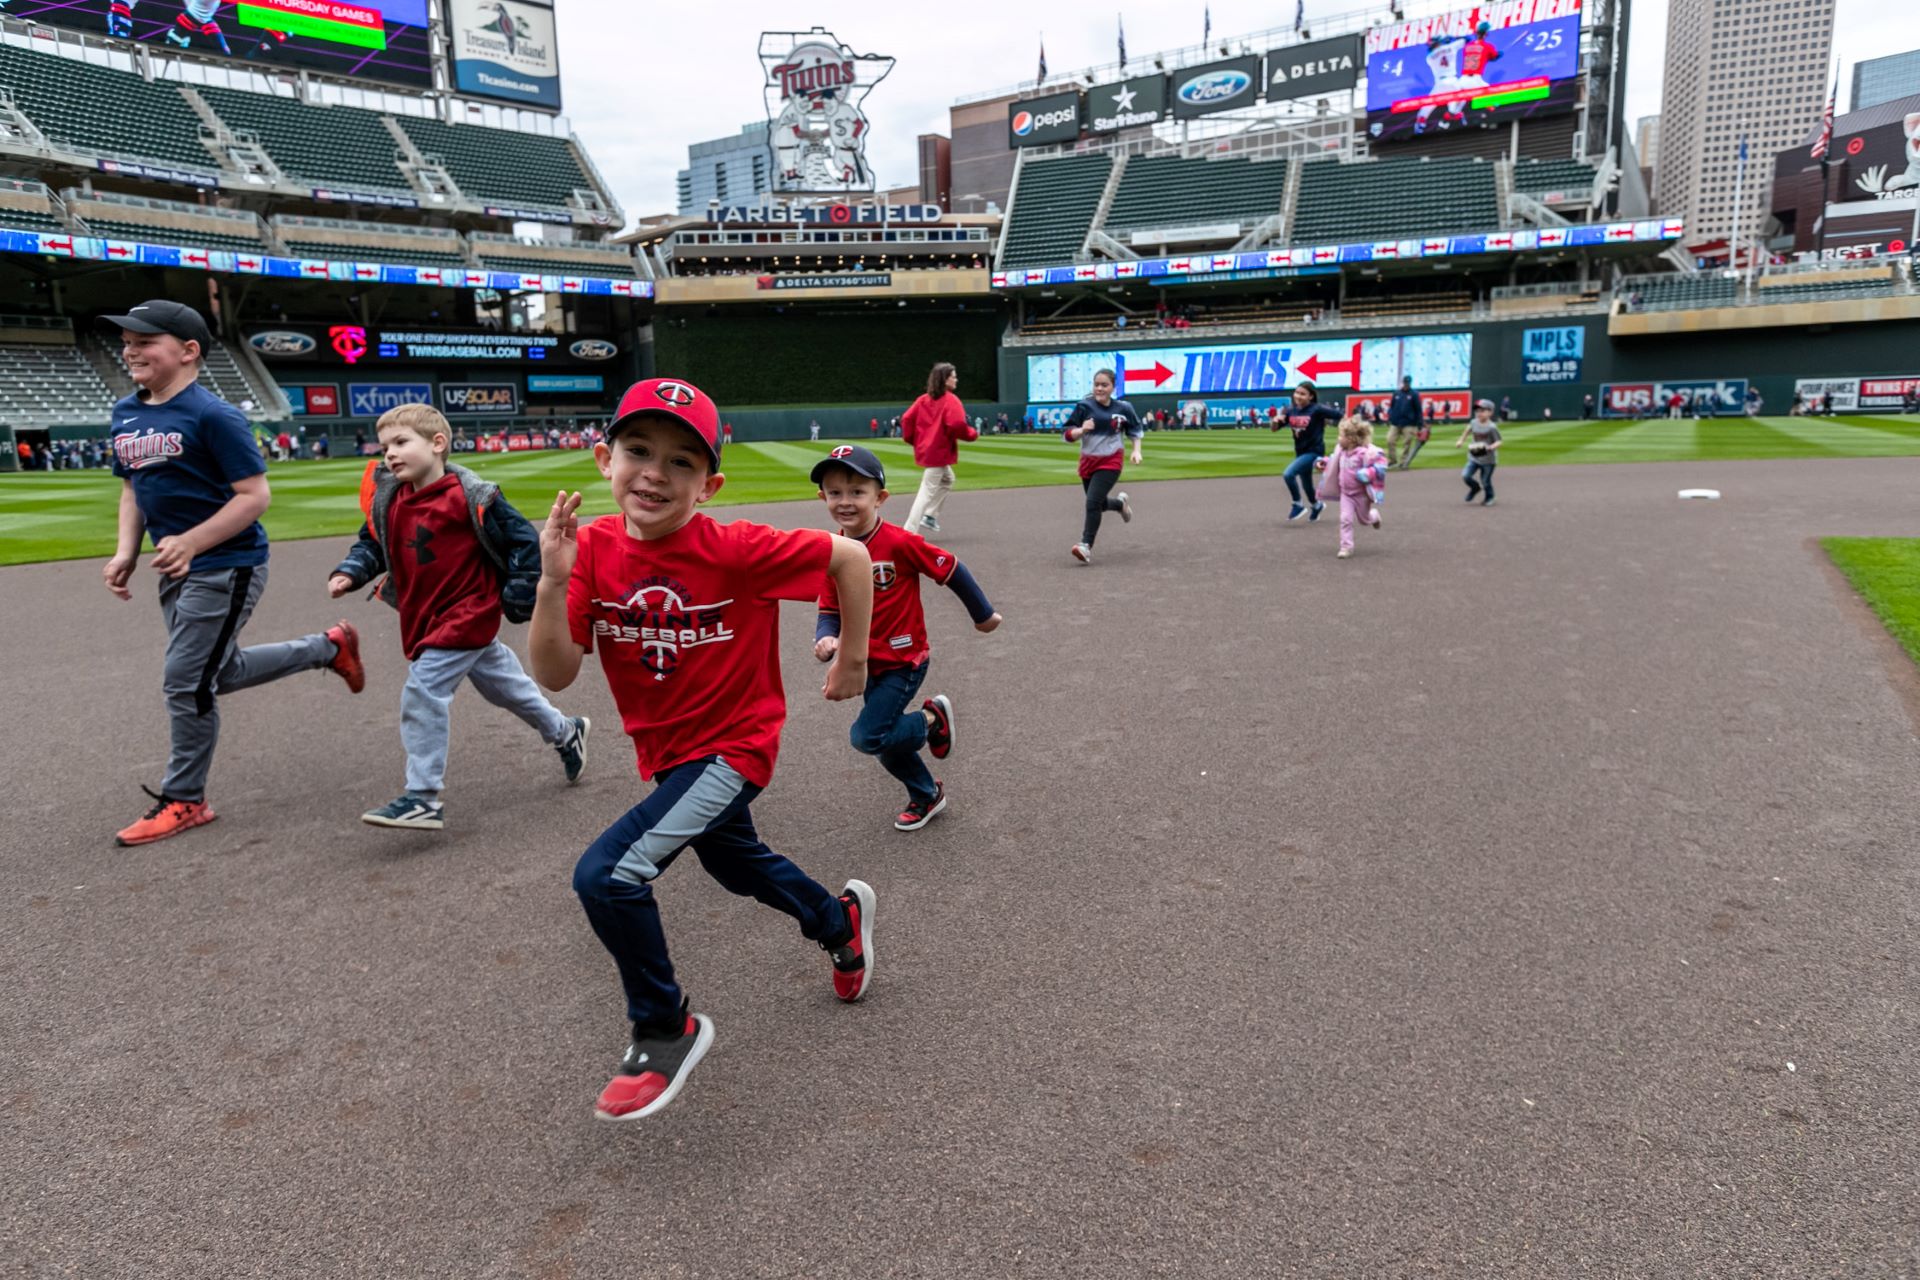 kids running bases at target field in minneapolis part of kids sunday game day